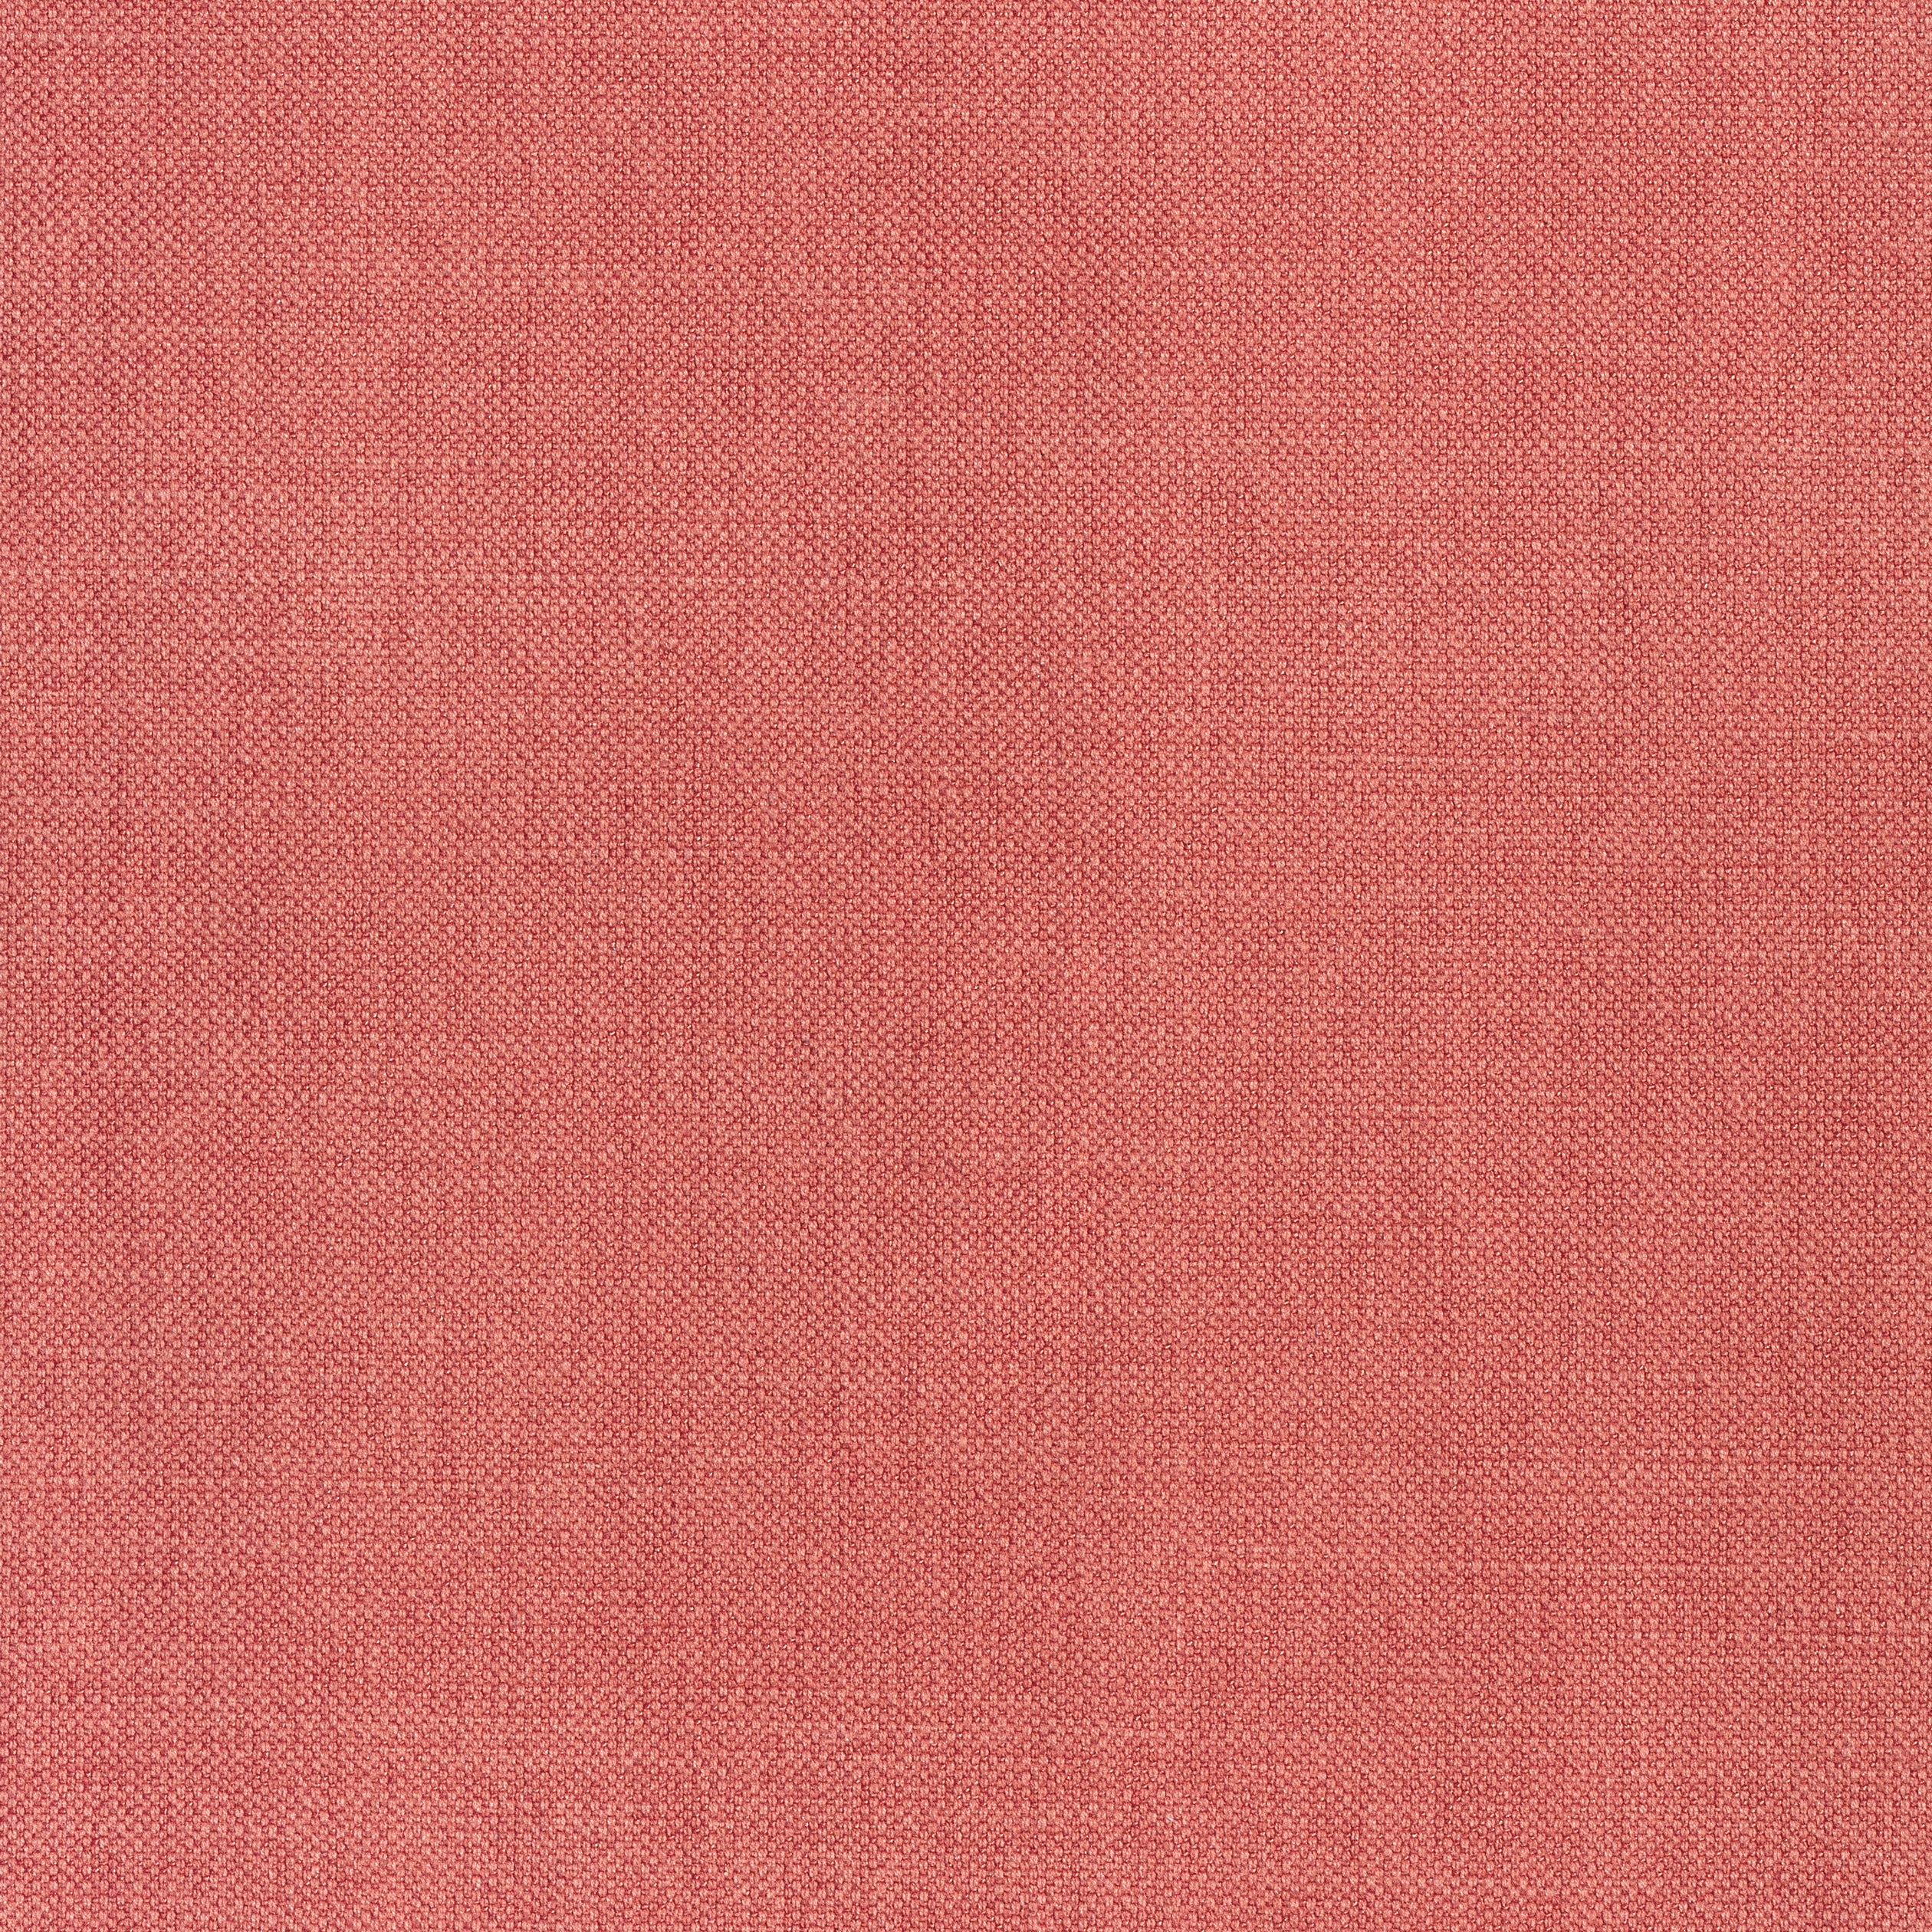 Prisma fabric in coral color - pattern number W70126 - by Thibaut in the Woven Resource Vol 12 Prisma Fabrics collection